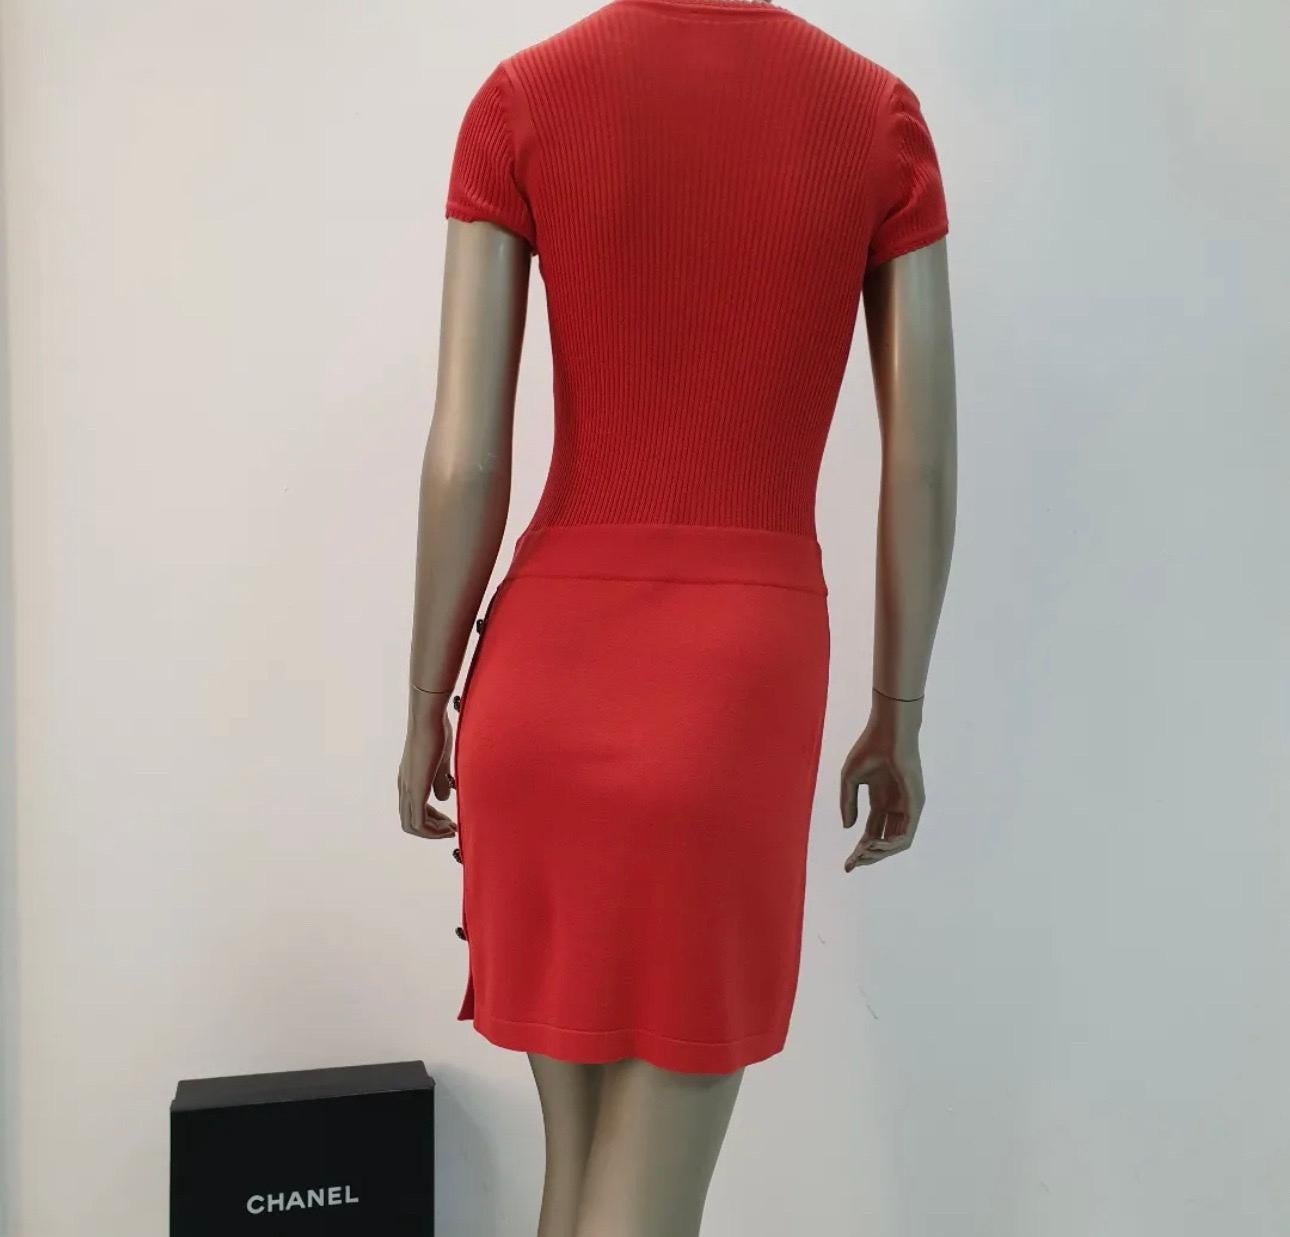  Red dress Chanel with logo in front and buttons on the side.
Sz.36
Very good condition.